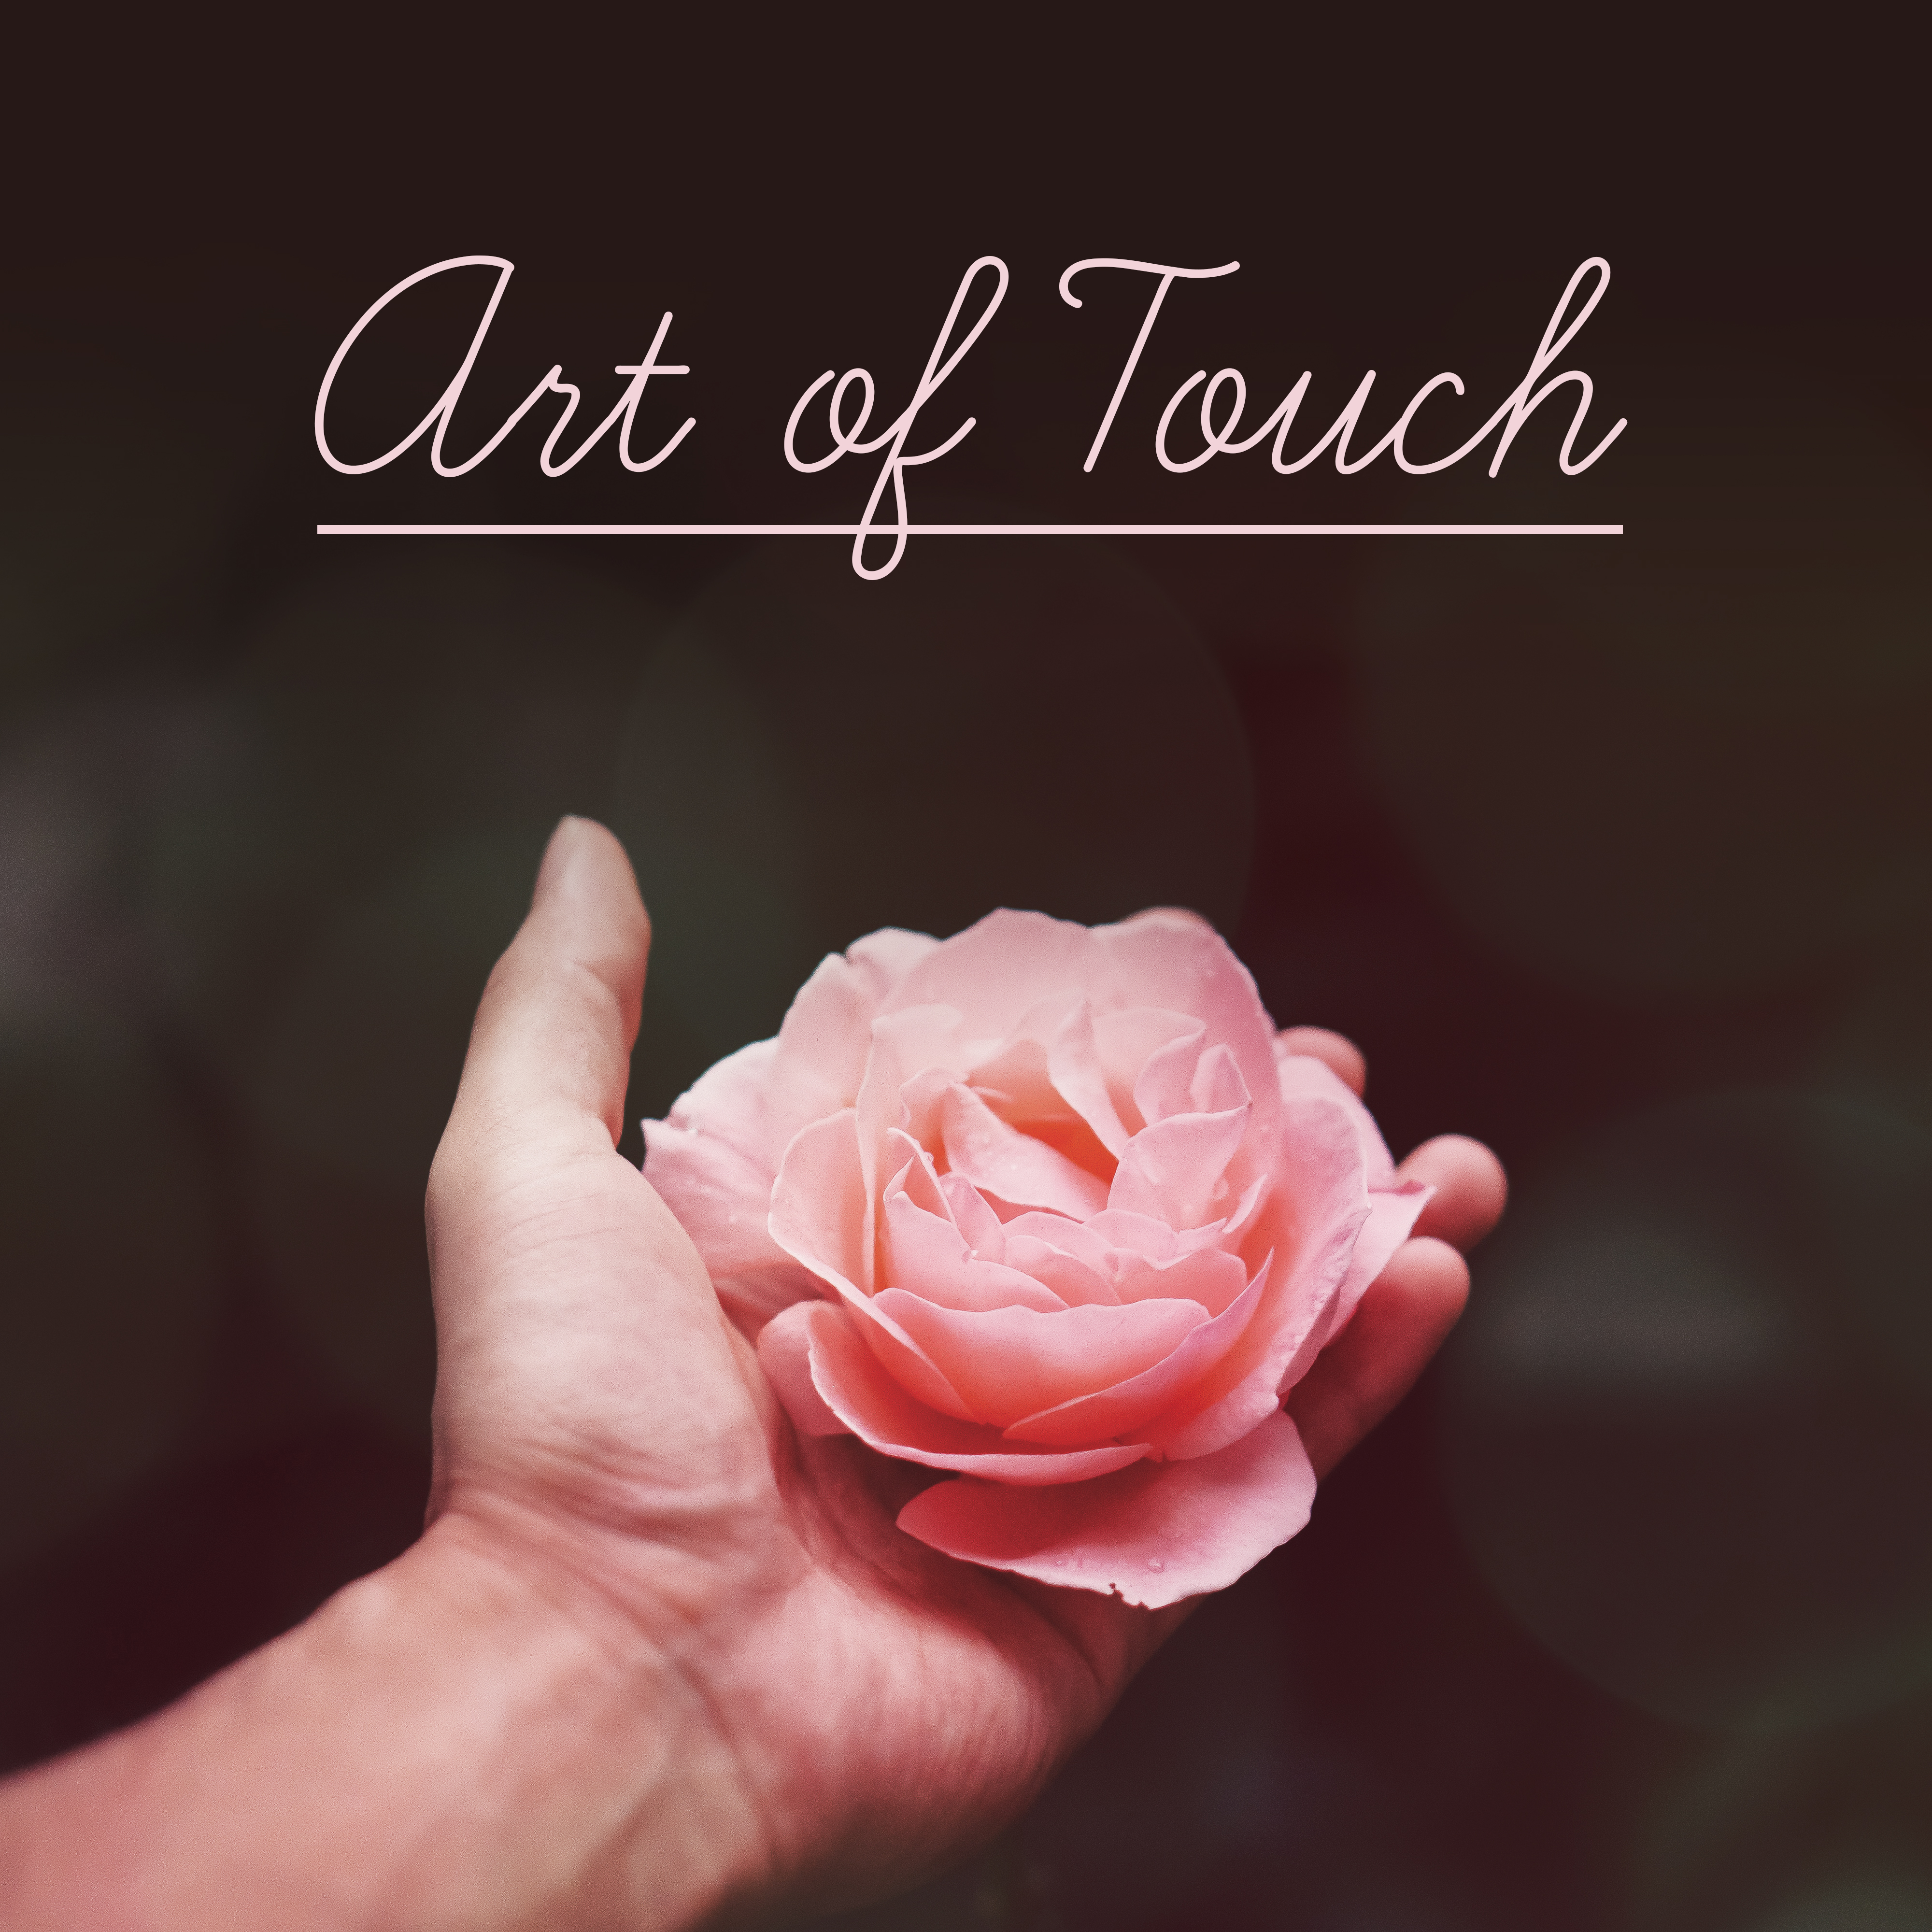 Art of Touch – Spa Relaxation, Massage, Calming Nature Sounds, New Age 2017, Pure Zen